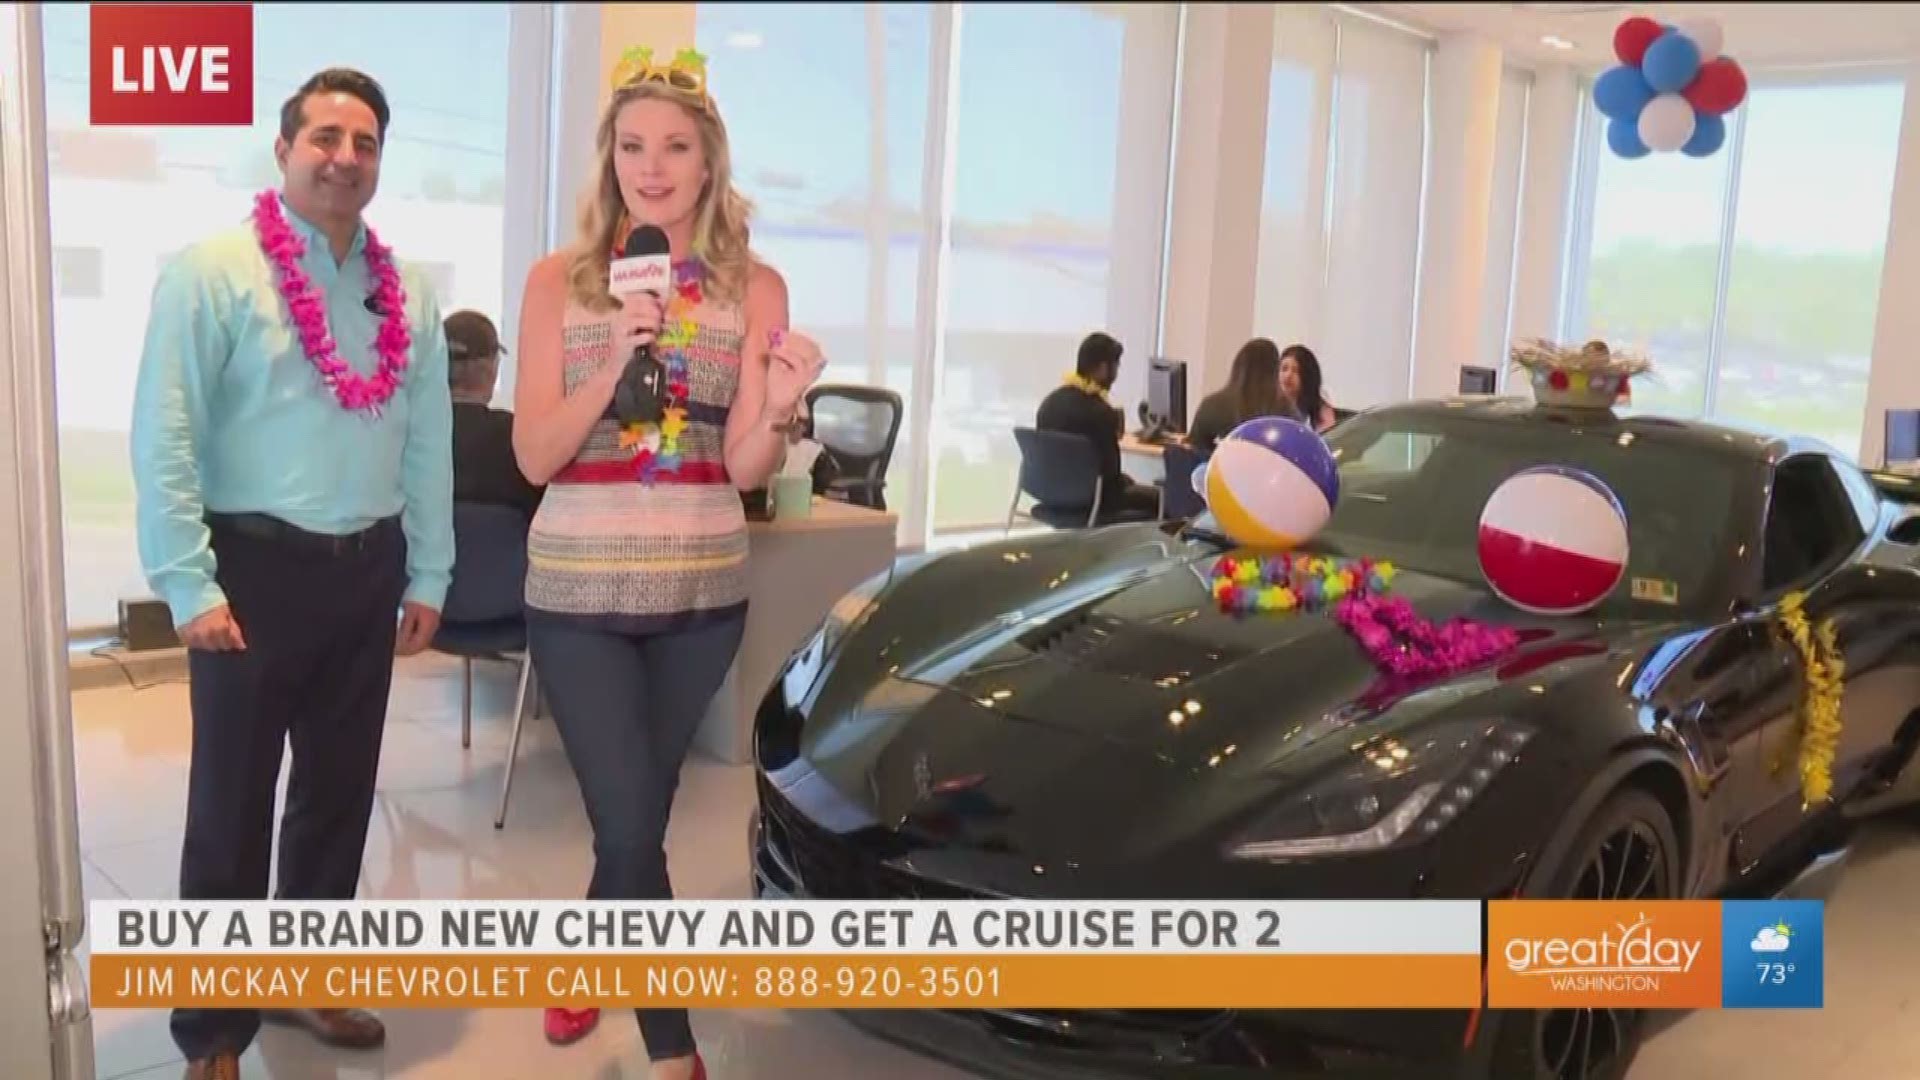 Buy a brand new Chevy at Jim McKay Chevrolet between Friday, May 24 - Monday, May 27, 2019, and you'll get a FREE cruise for two. Jim McKay also has an amazing credit amnesty program, no matter what your credit history, they will help you buy the car of your dreams. Call 888-920-3501 to make an appointment.